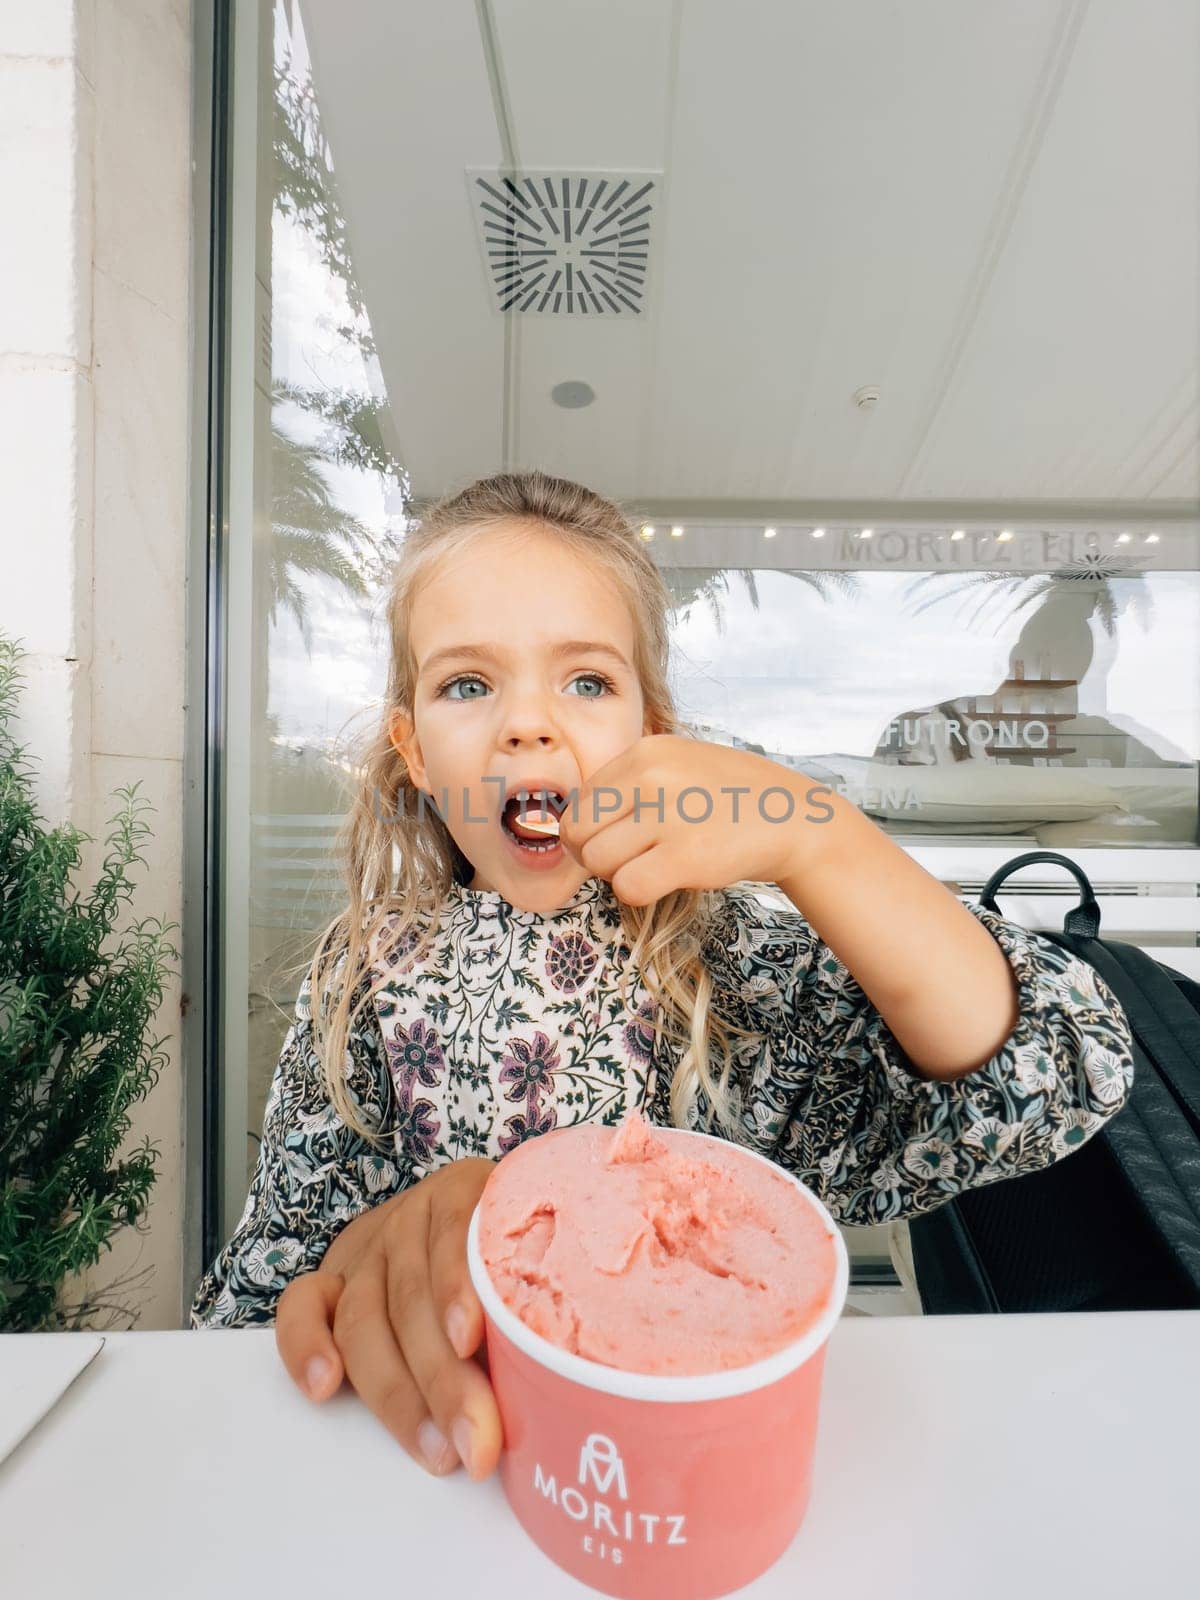 Tivat, Montenegro - 06 august 2023: Little girl eats pink ice cream from a cup with a spatula at the table. Caption: Moritz Eis by Nadtochiy